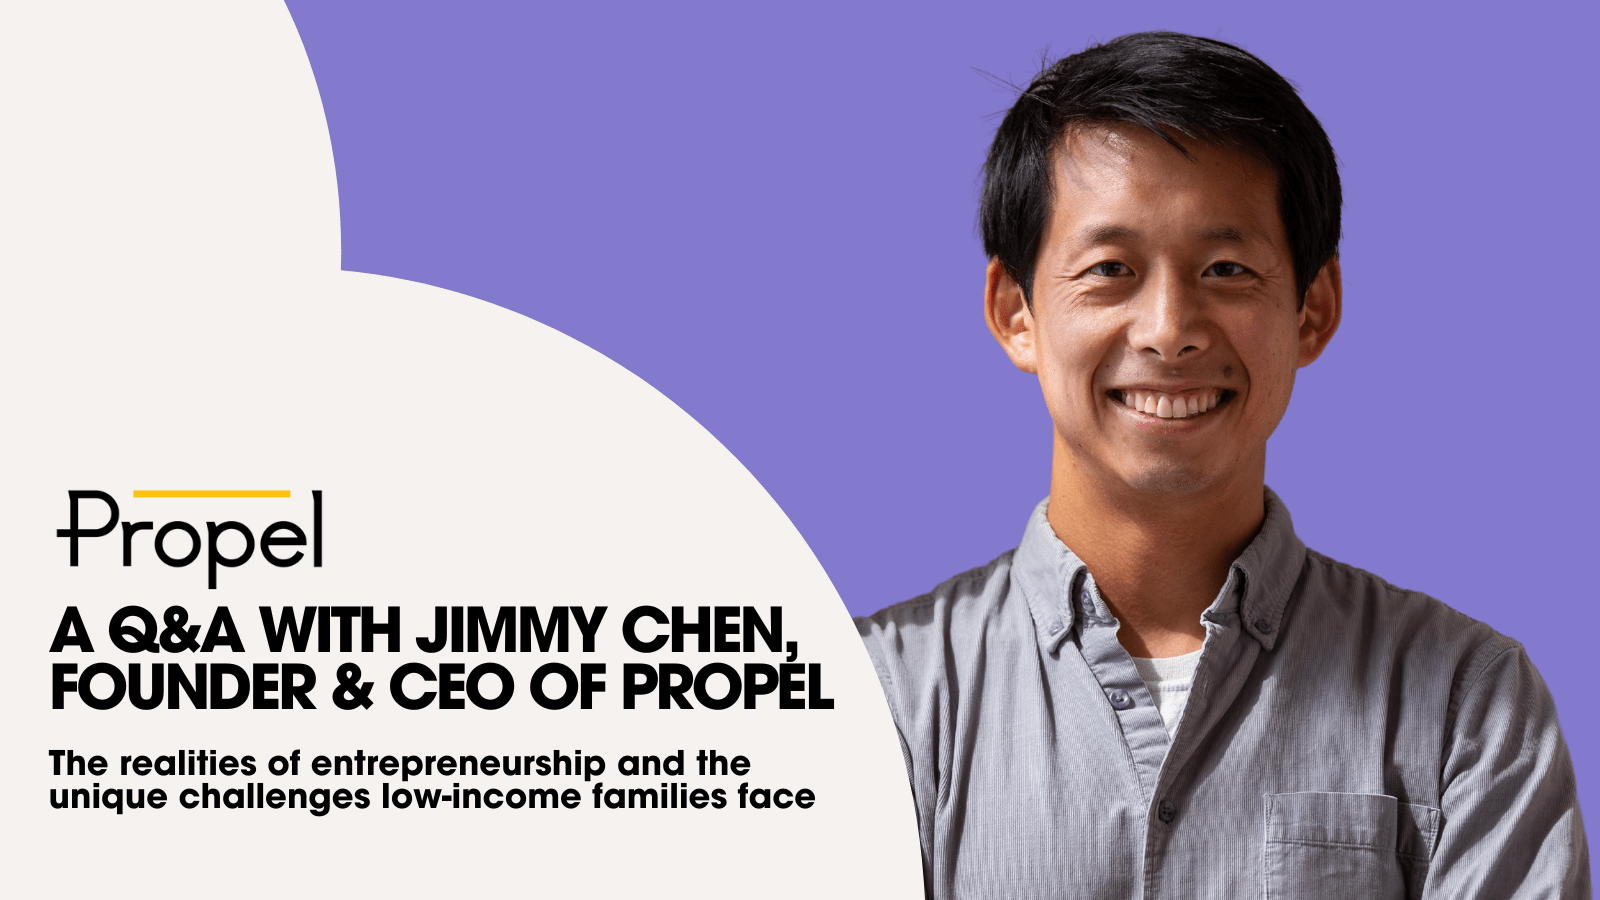 Q&A with Propel Founder & CEO Jimmy Chen